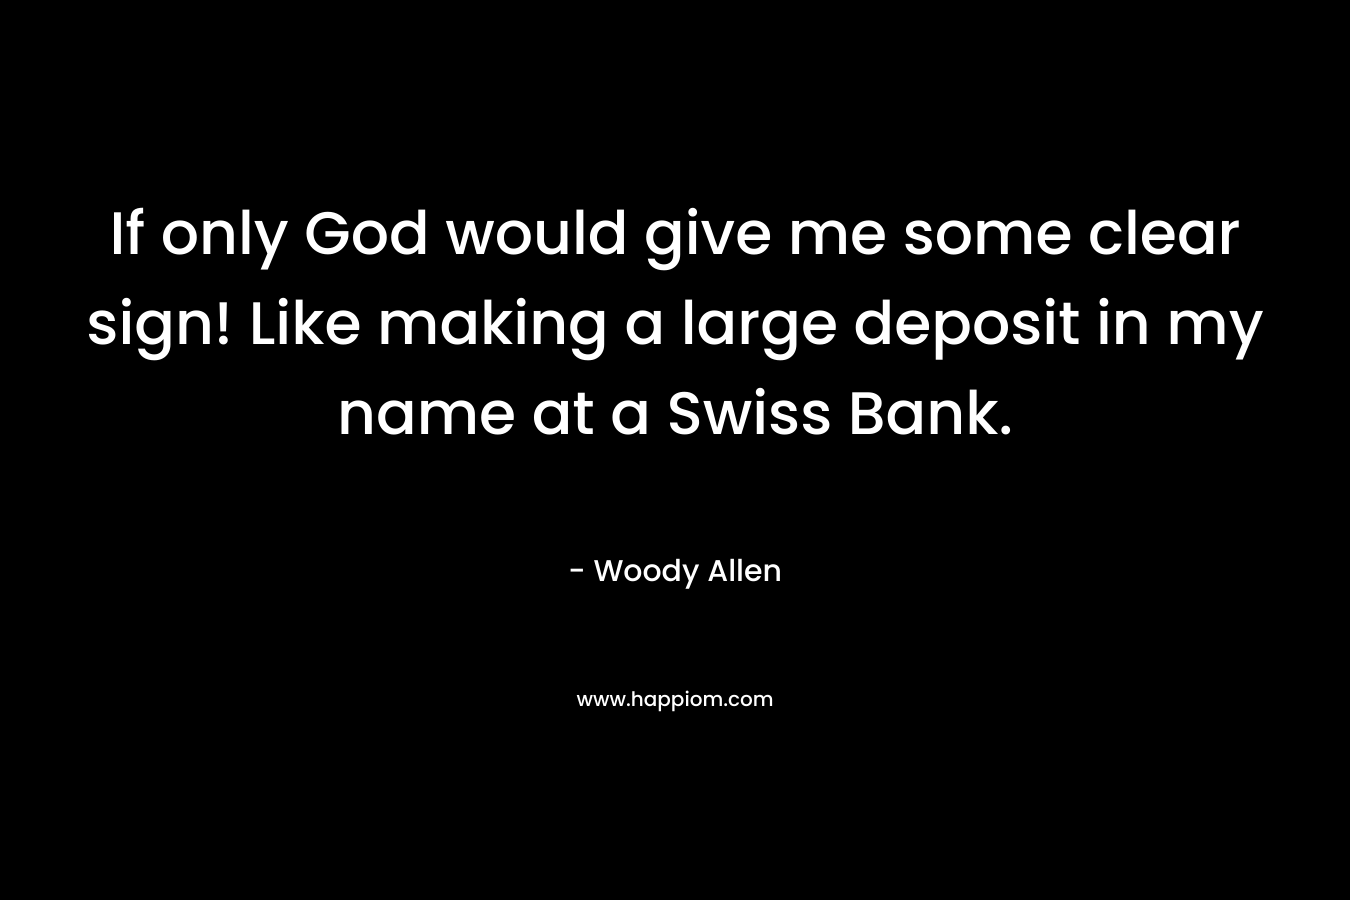 If only God would give me some clear sign! Like making a large deposit in my name at a Swiss Bank. – Woody Allen